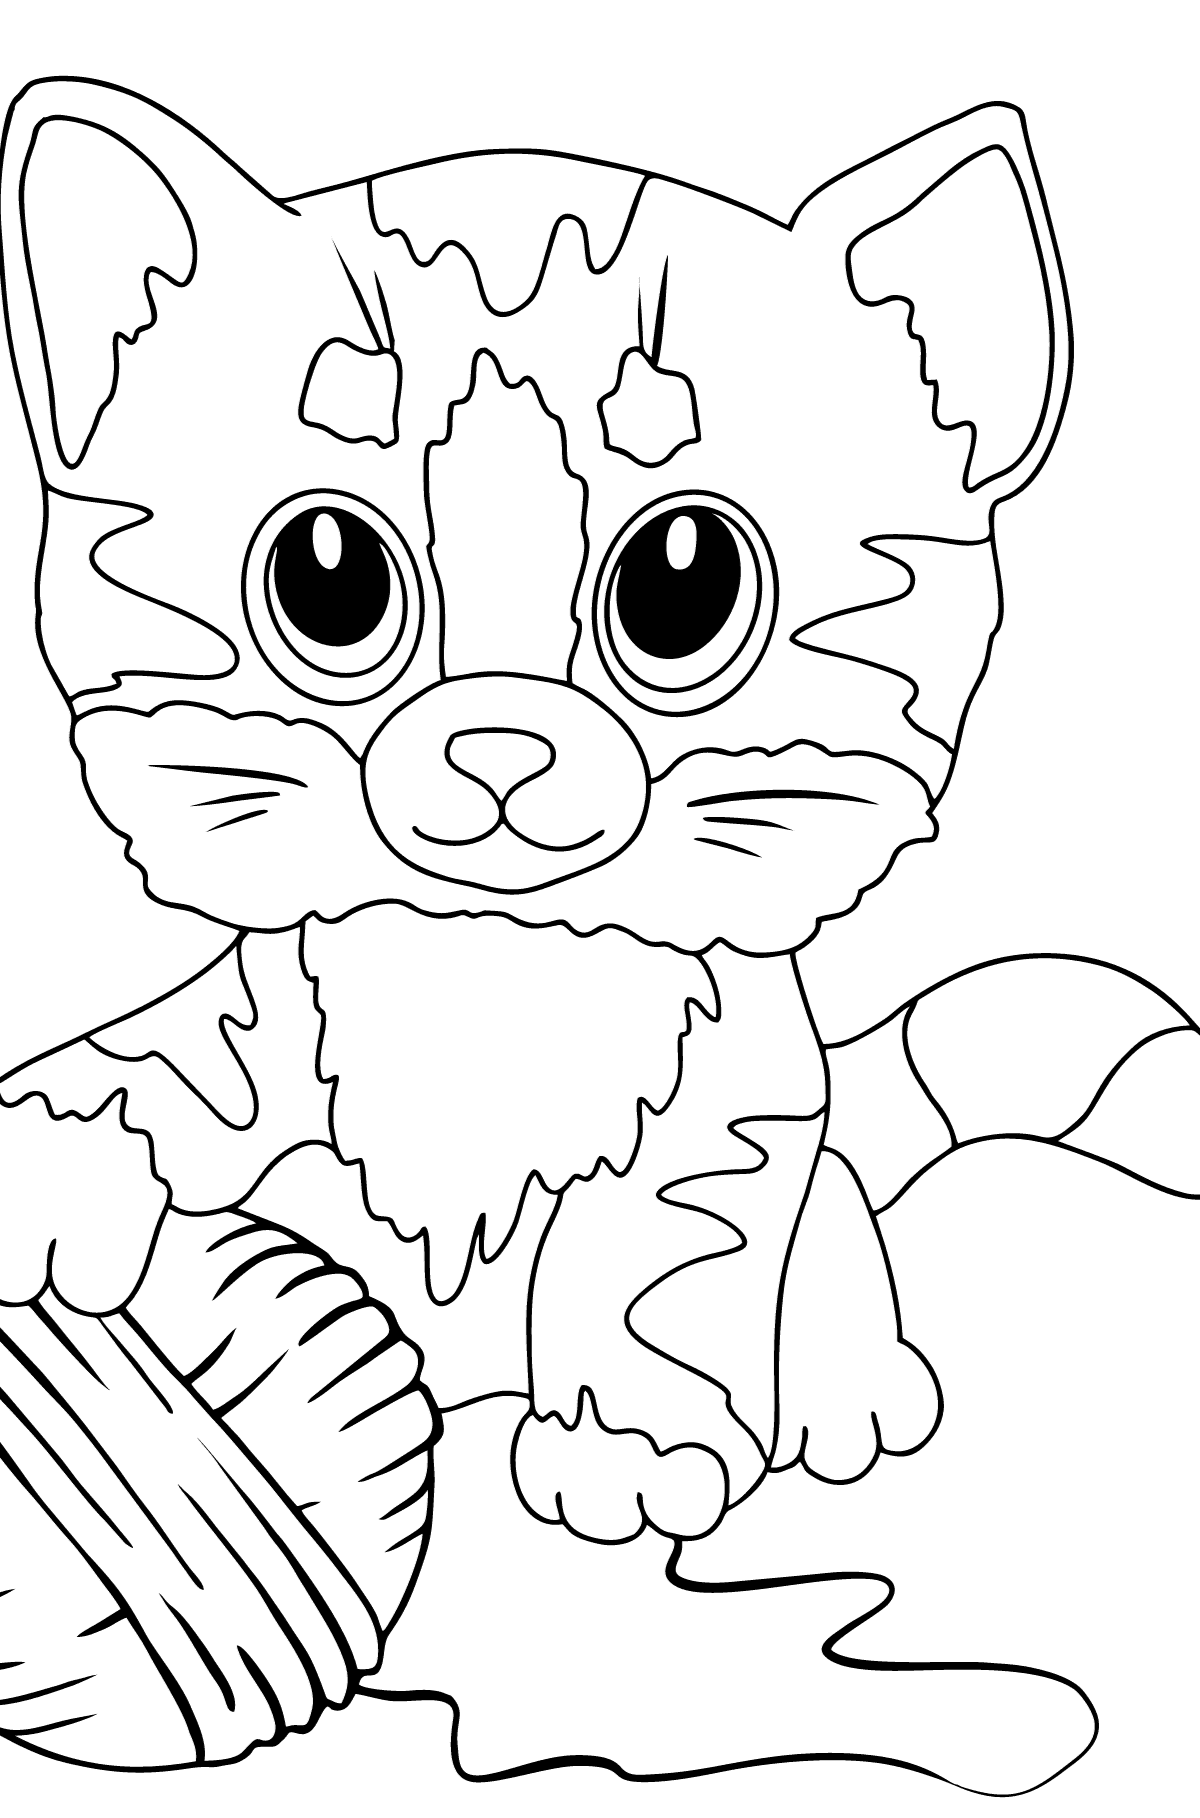 Kitten with Yarn coloring page - Coloring Pages for Kids